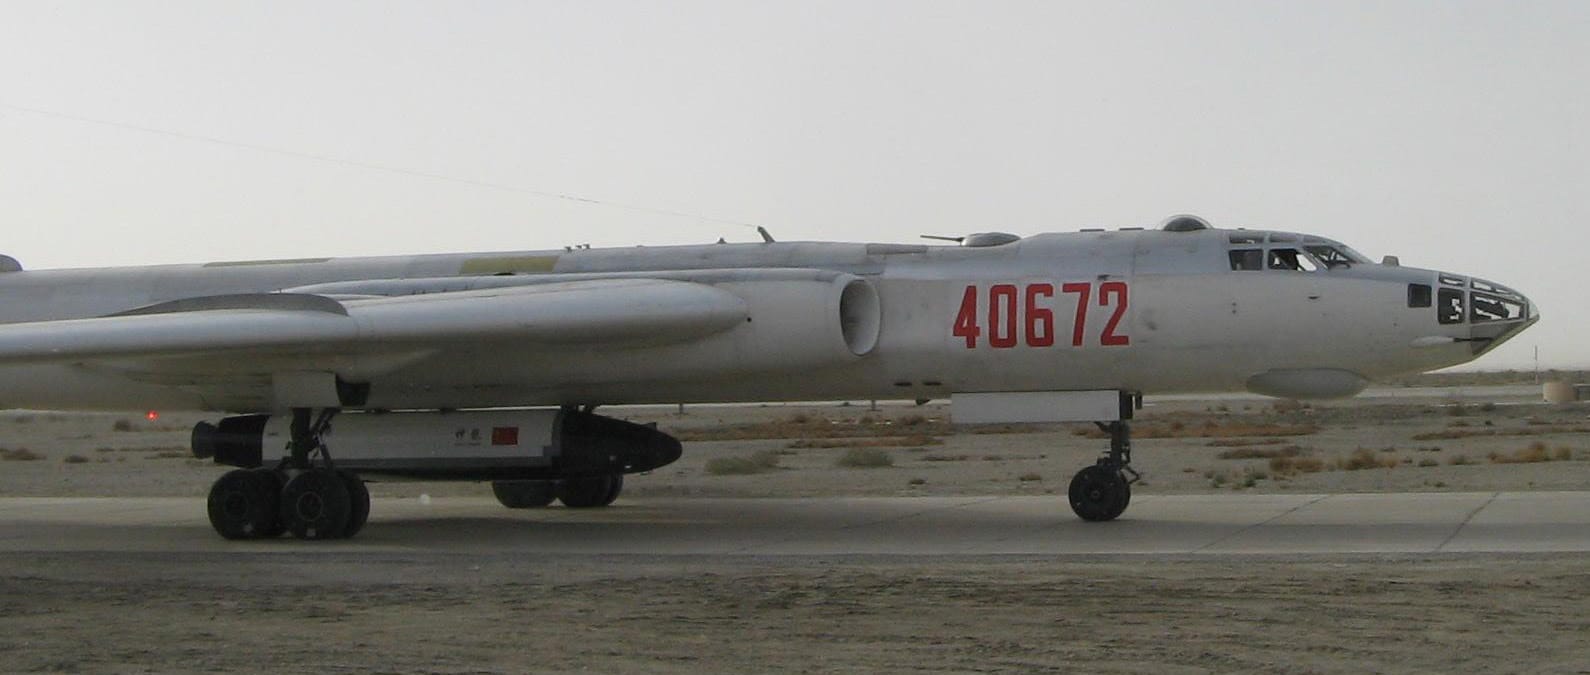 The reusable space vehicle's believed technology demonstrator underneath the H-6 bomber.